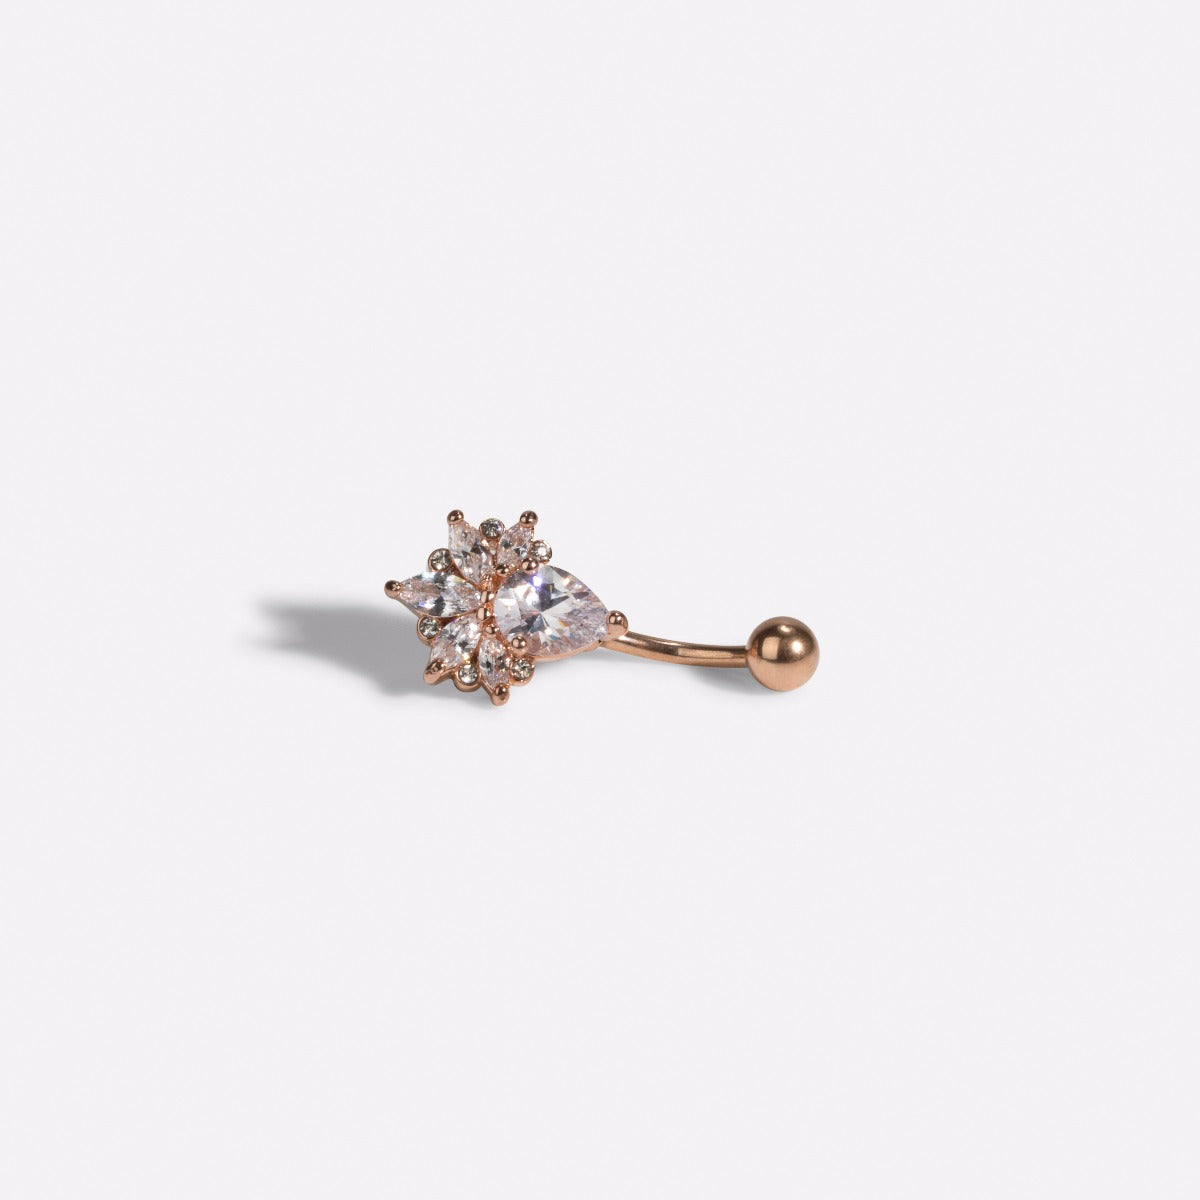 Stainless steel rose gold belly button ring with cubic zirconia stones